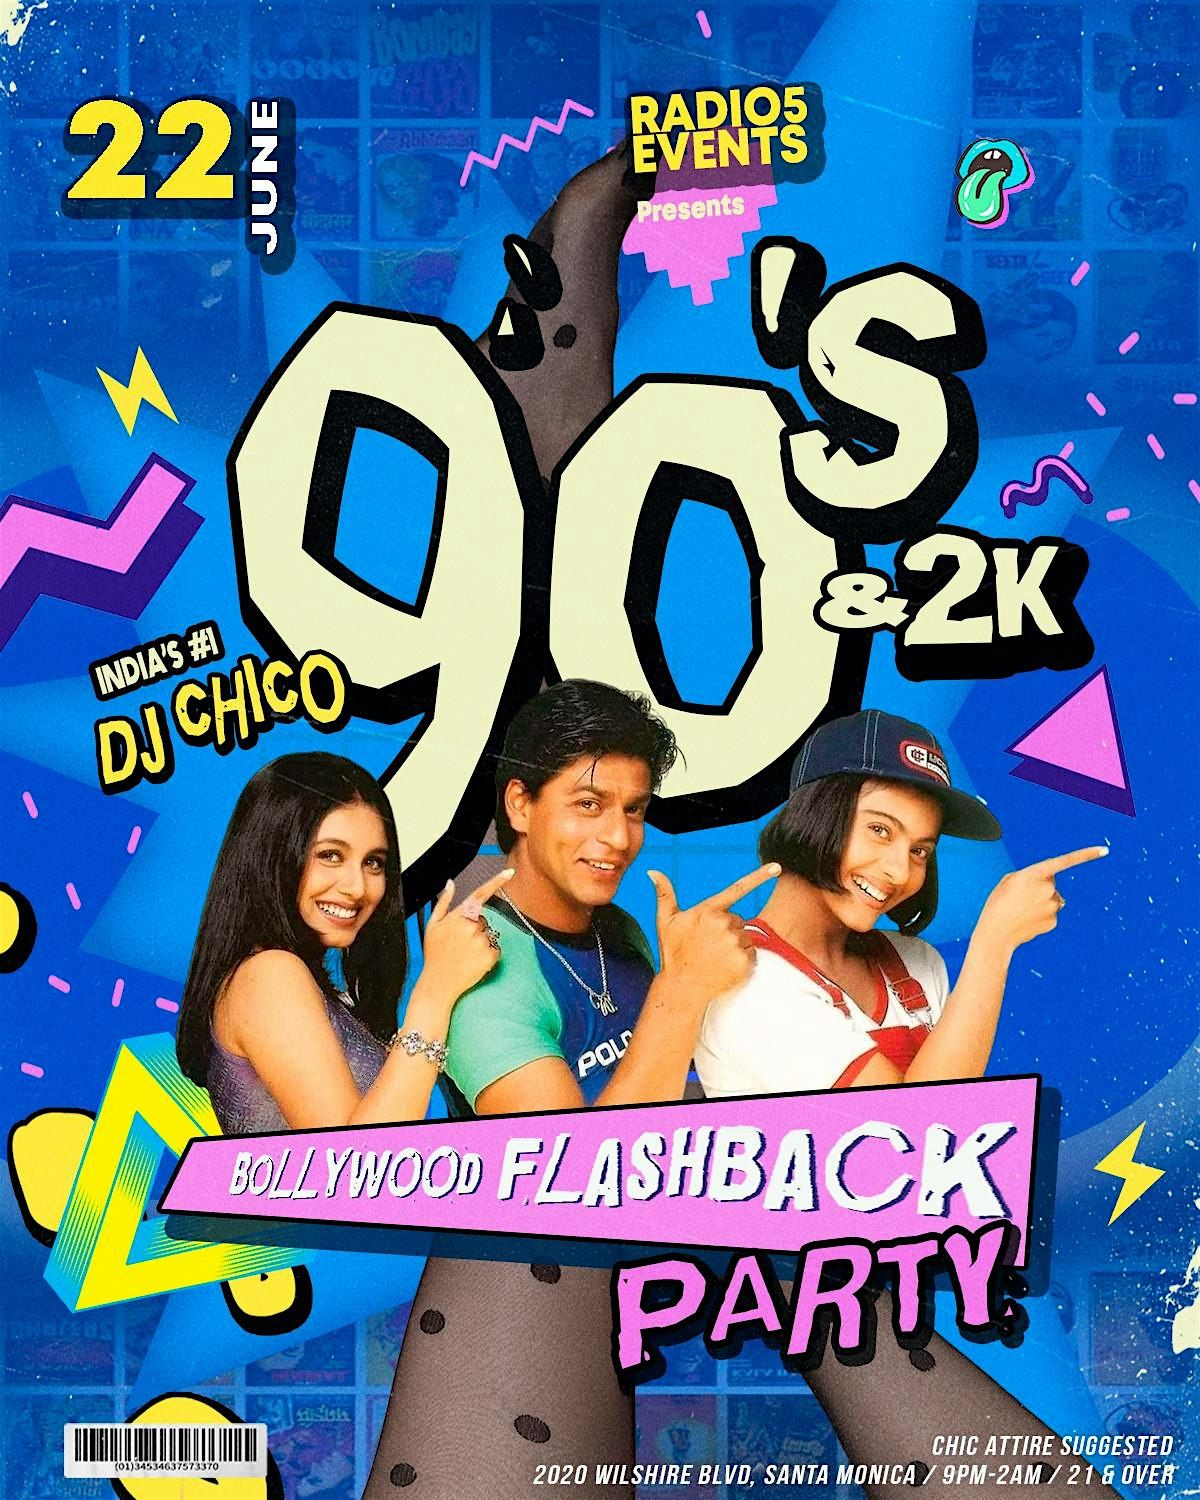 Bollywood Flashback: Back To The 90's & 2k Party Feat India's #1 DJ CHICO!